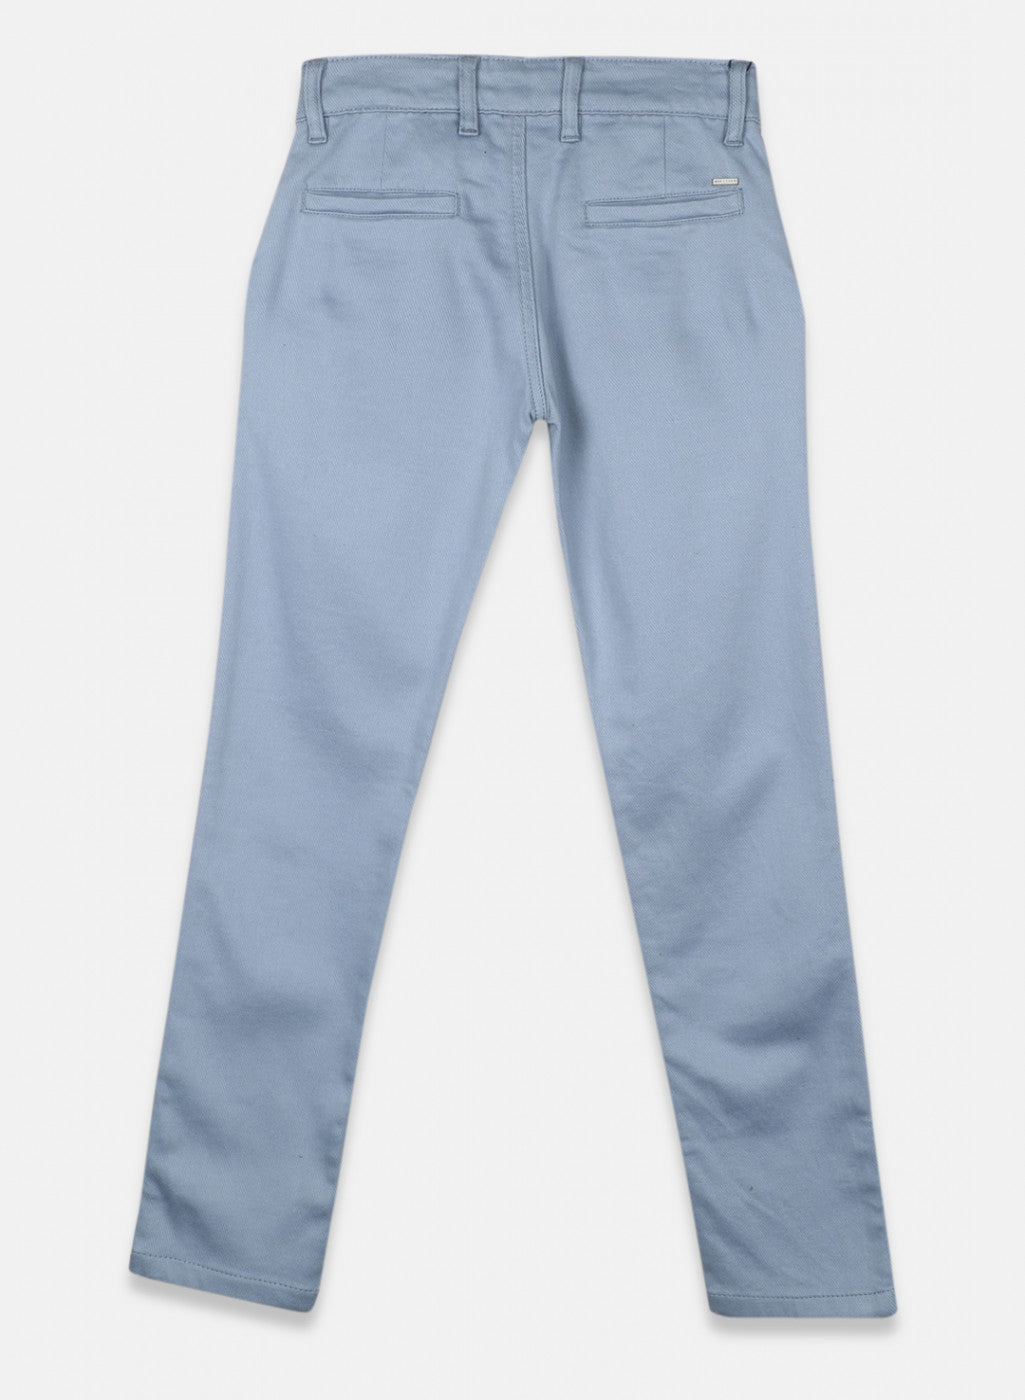 Mr Jek Boy's trousers with large pockets: for sale at 19.99€ on  Mecshopping.it